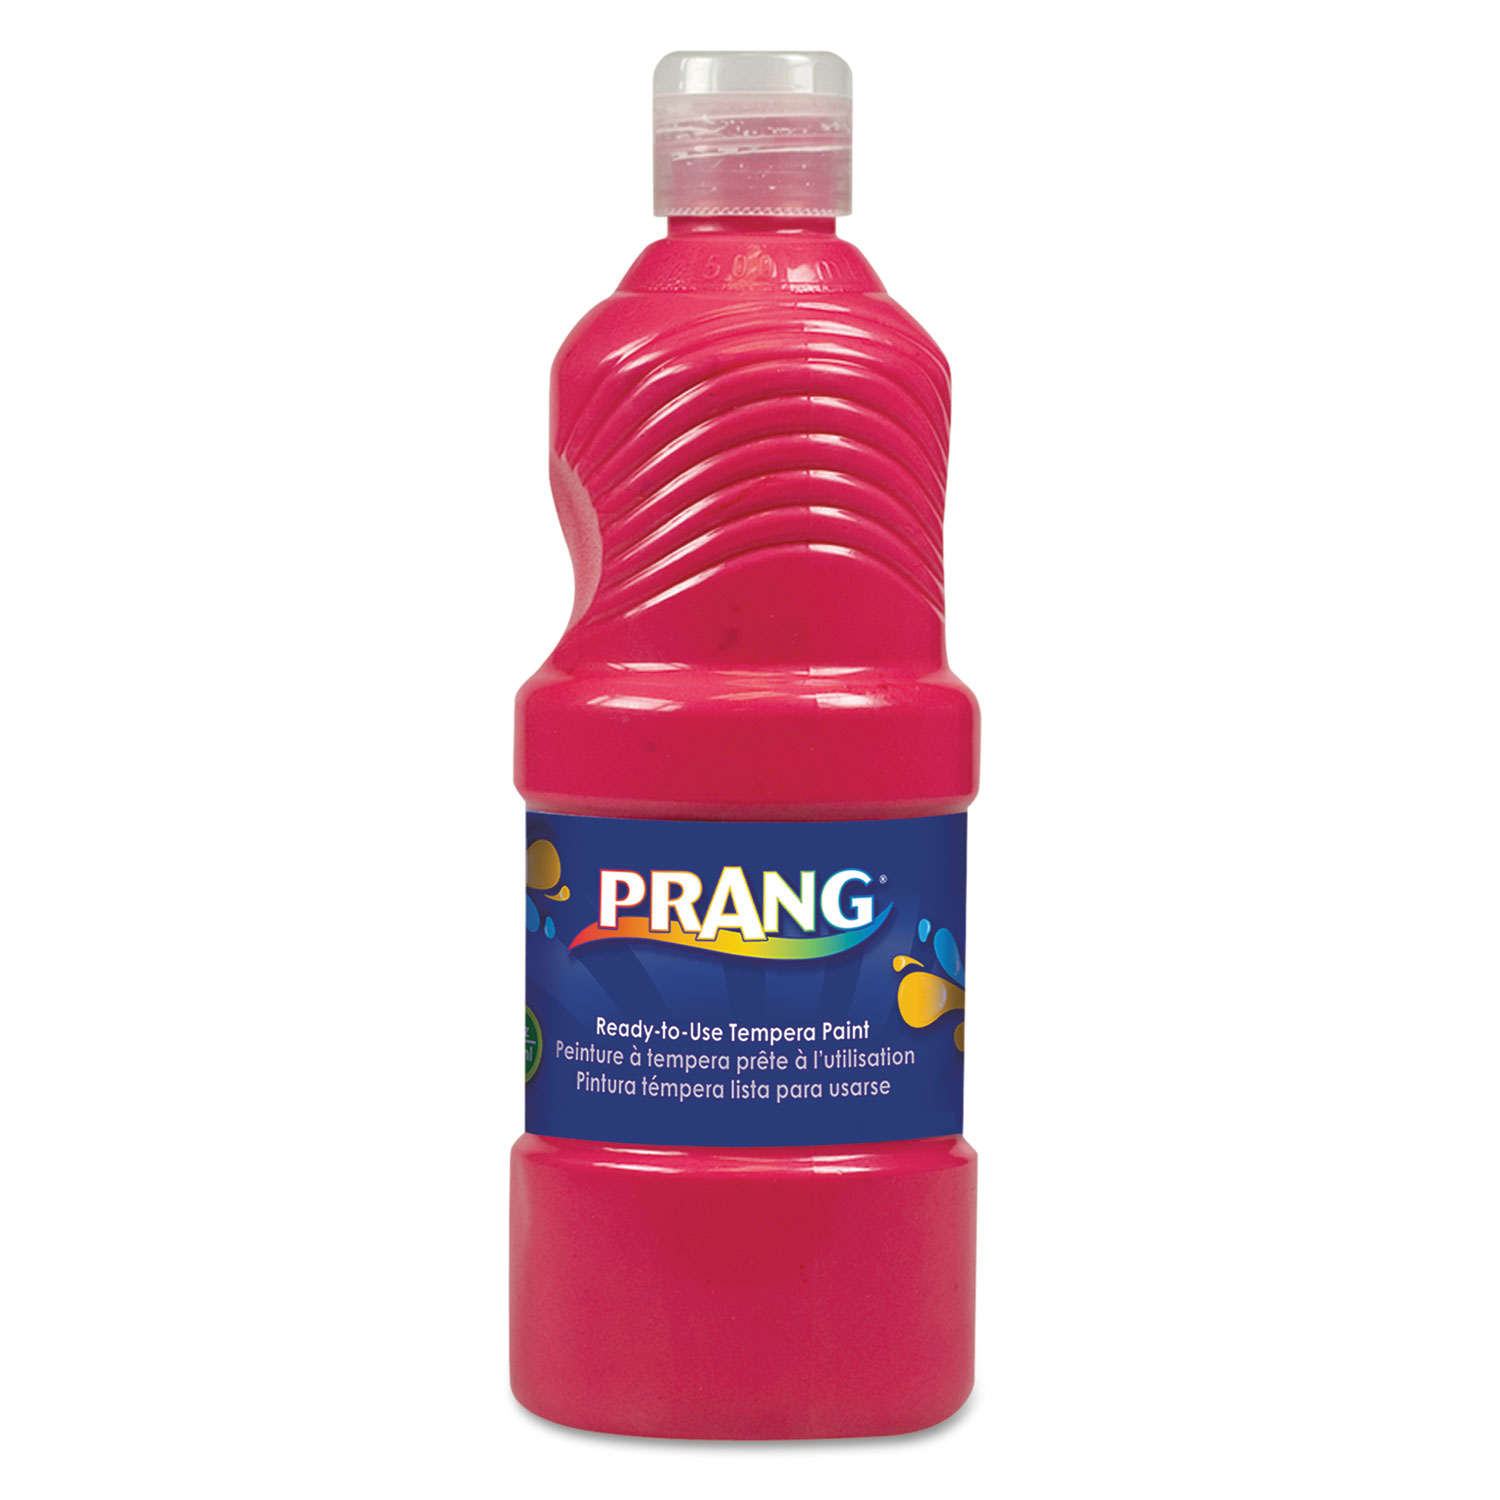 Prang® Ready-to-Use Tempera Paint, Red, 16 oz